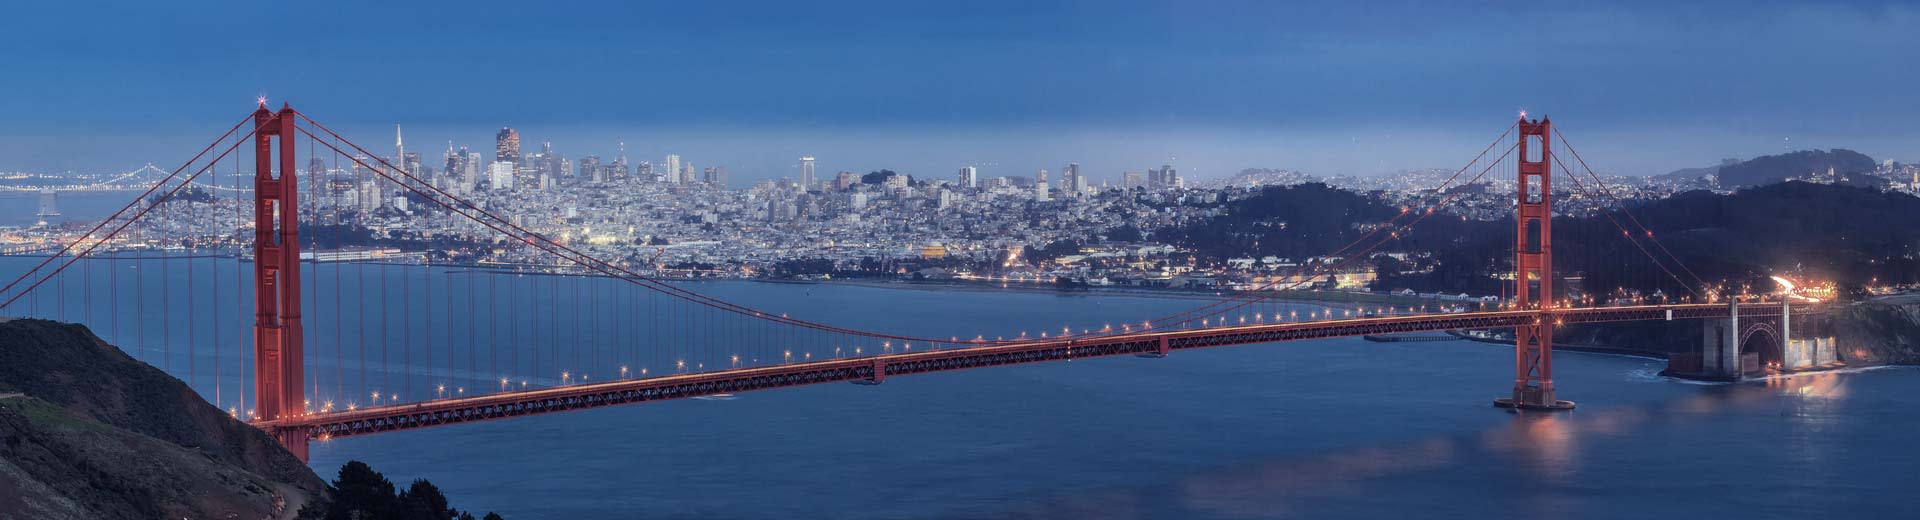 With San Francisco in the background, the world-famous Golden Gate Bridge stretches across the bay.